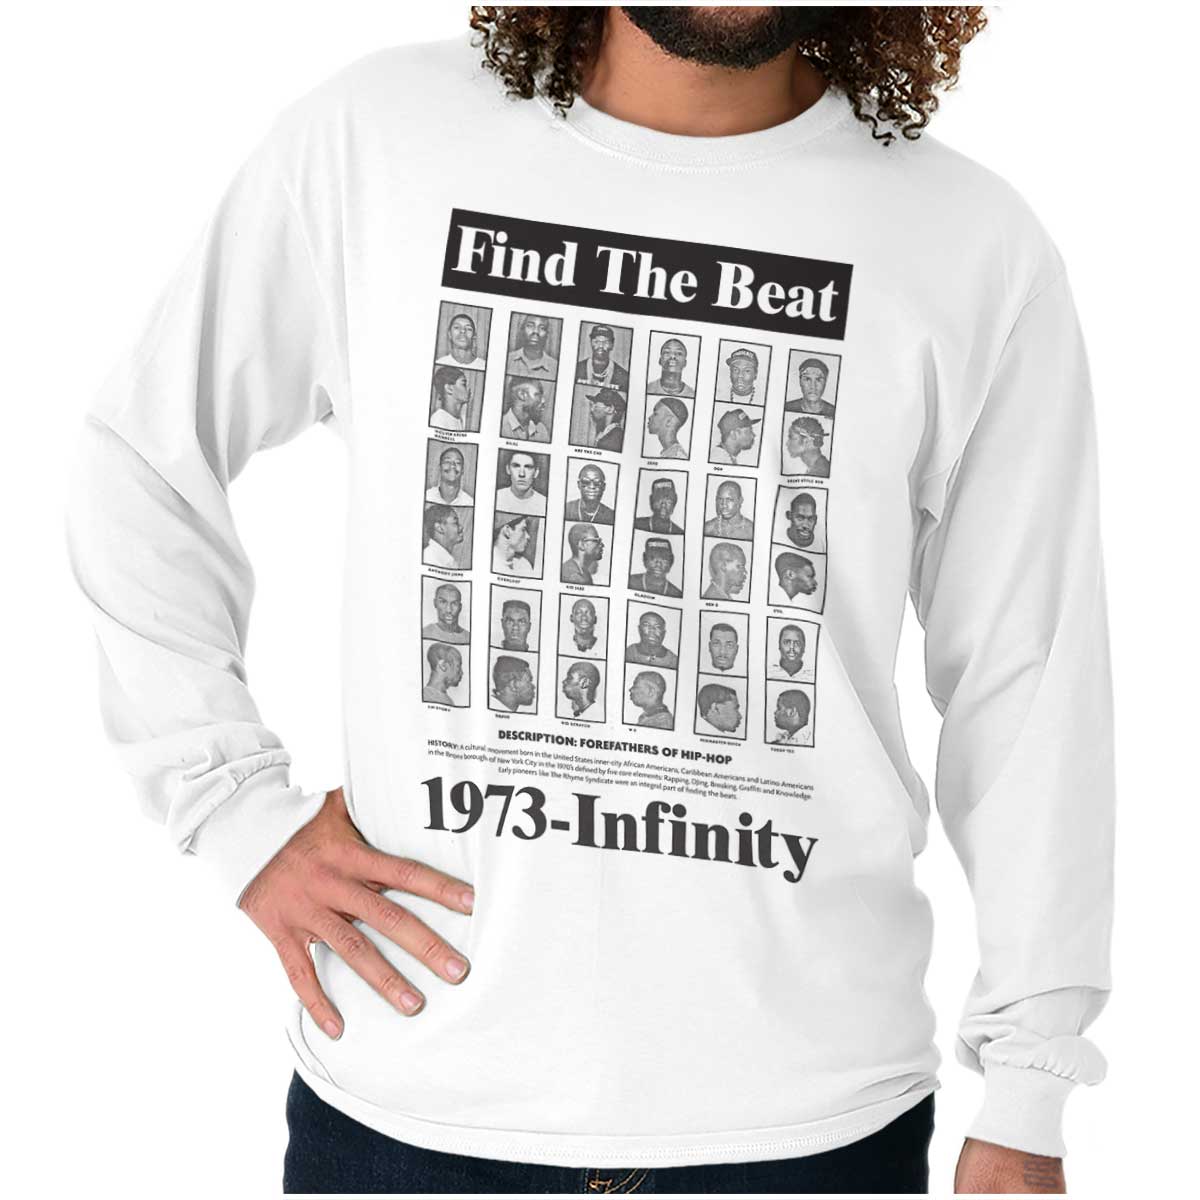 Immerse yourself in the genuine hip-hop culture and honor its rich history by wearing this stylish garment, keeping the spirit of hip-hop alive with the images of different legendary hip-hop artists.